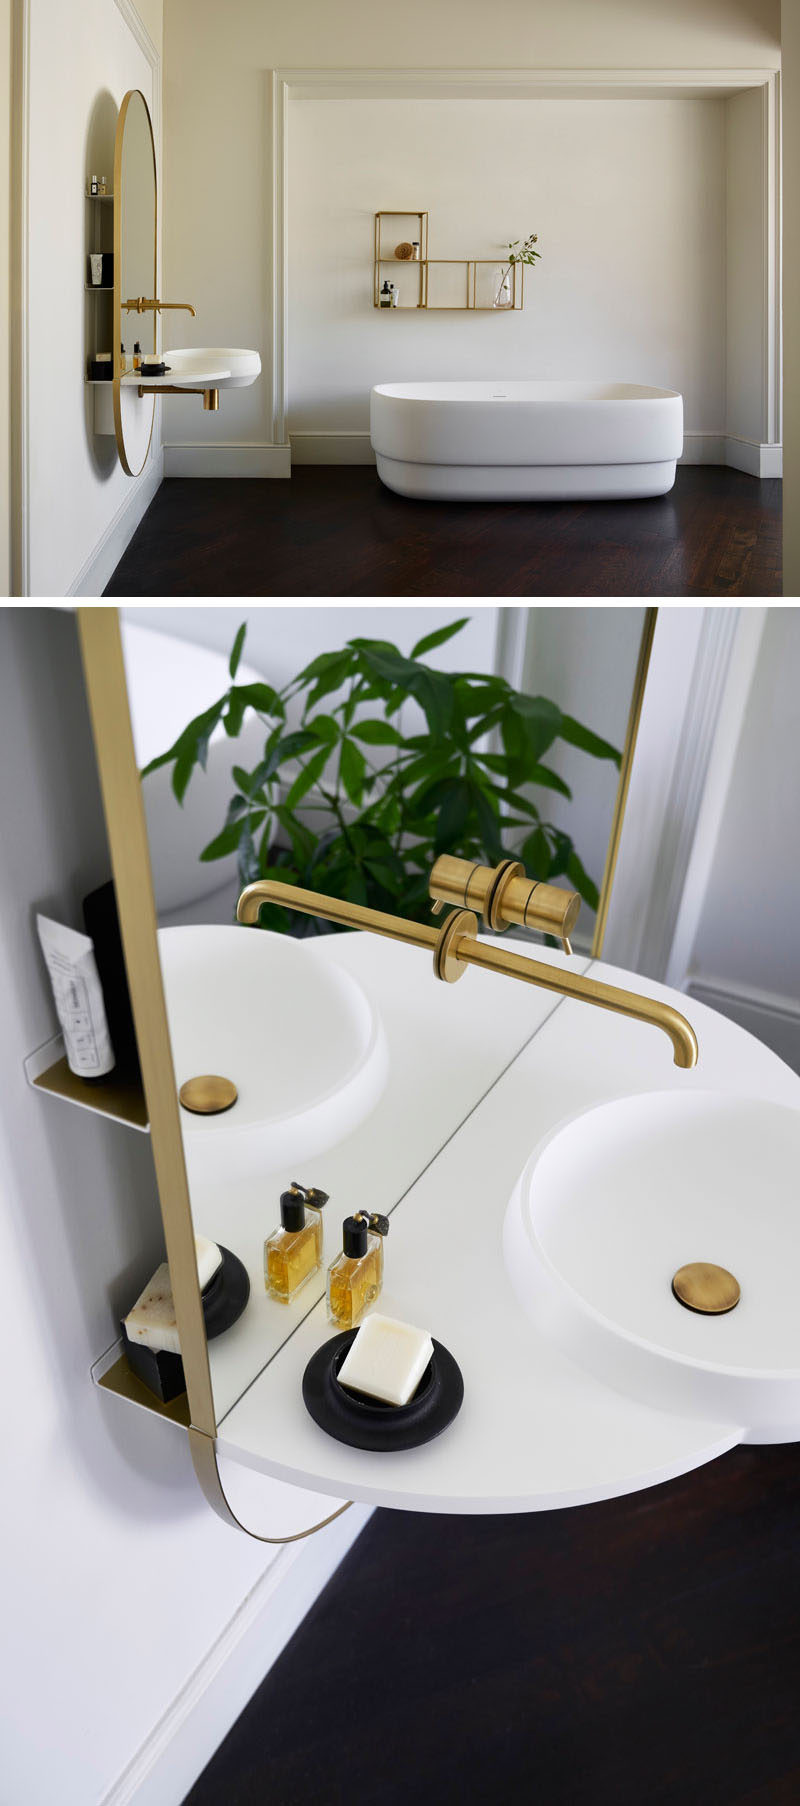 Mut Design studio have created ARCO, a multi-functional piece of bathroom furniture that has an integrated mirror, taps, washbasin, and shelving system hidden behind the glass. #Bathroom #BathroomMirror #ModernBathroom